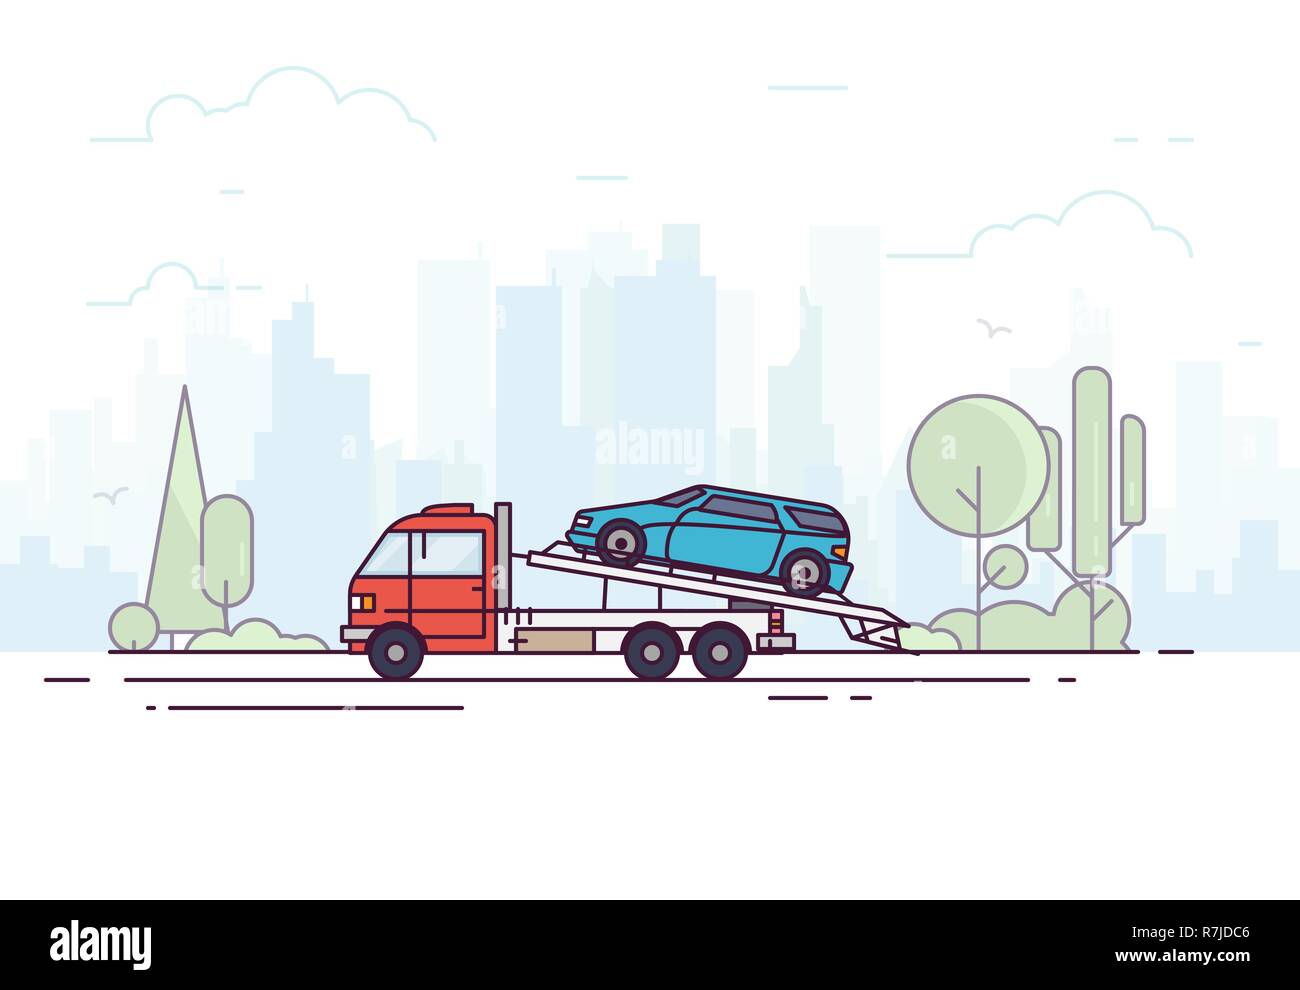 City tow truck on city road. Urban background, skyscrapers and buildings, park and trees. Emergency assistance on the road concept with city backgroun Stock Vector